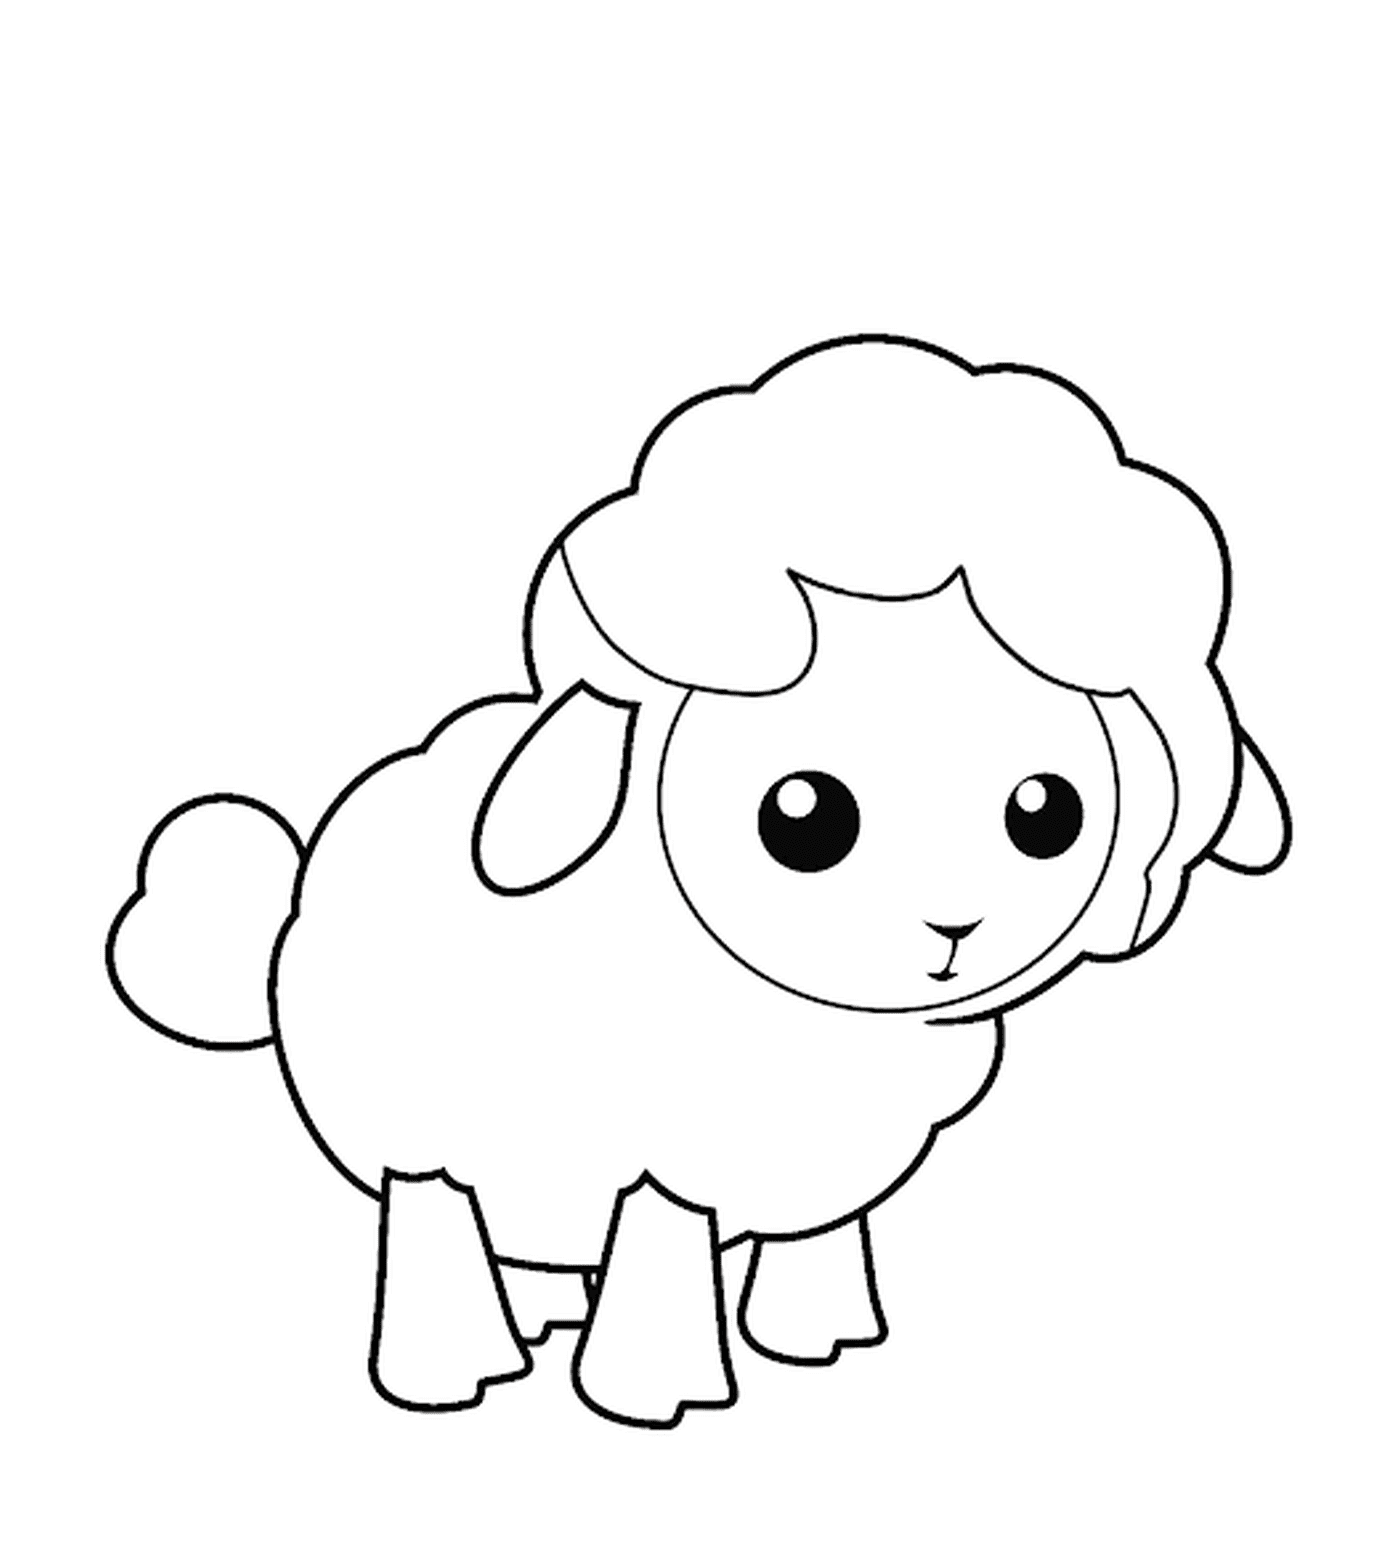  Lamb is shown as an illustration 